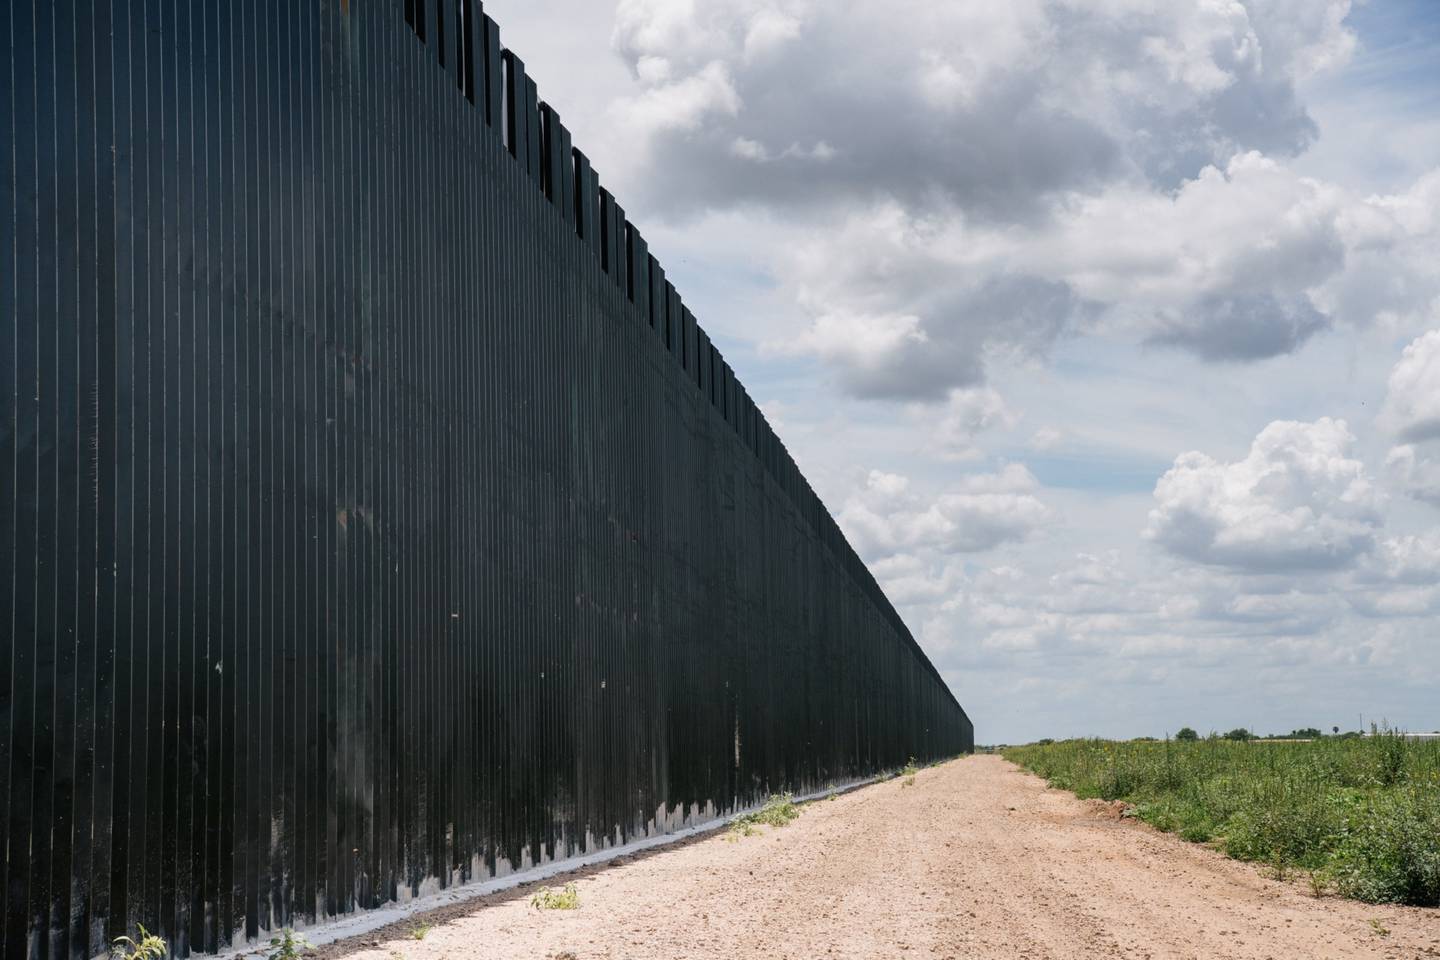 The border wall hasn't lost its appeal to Republicans.